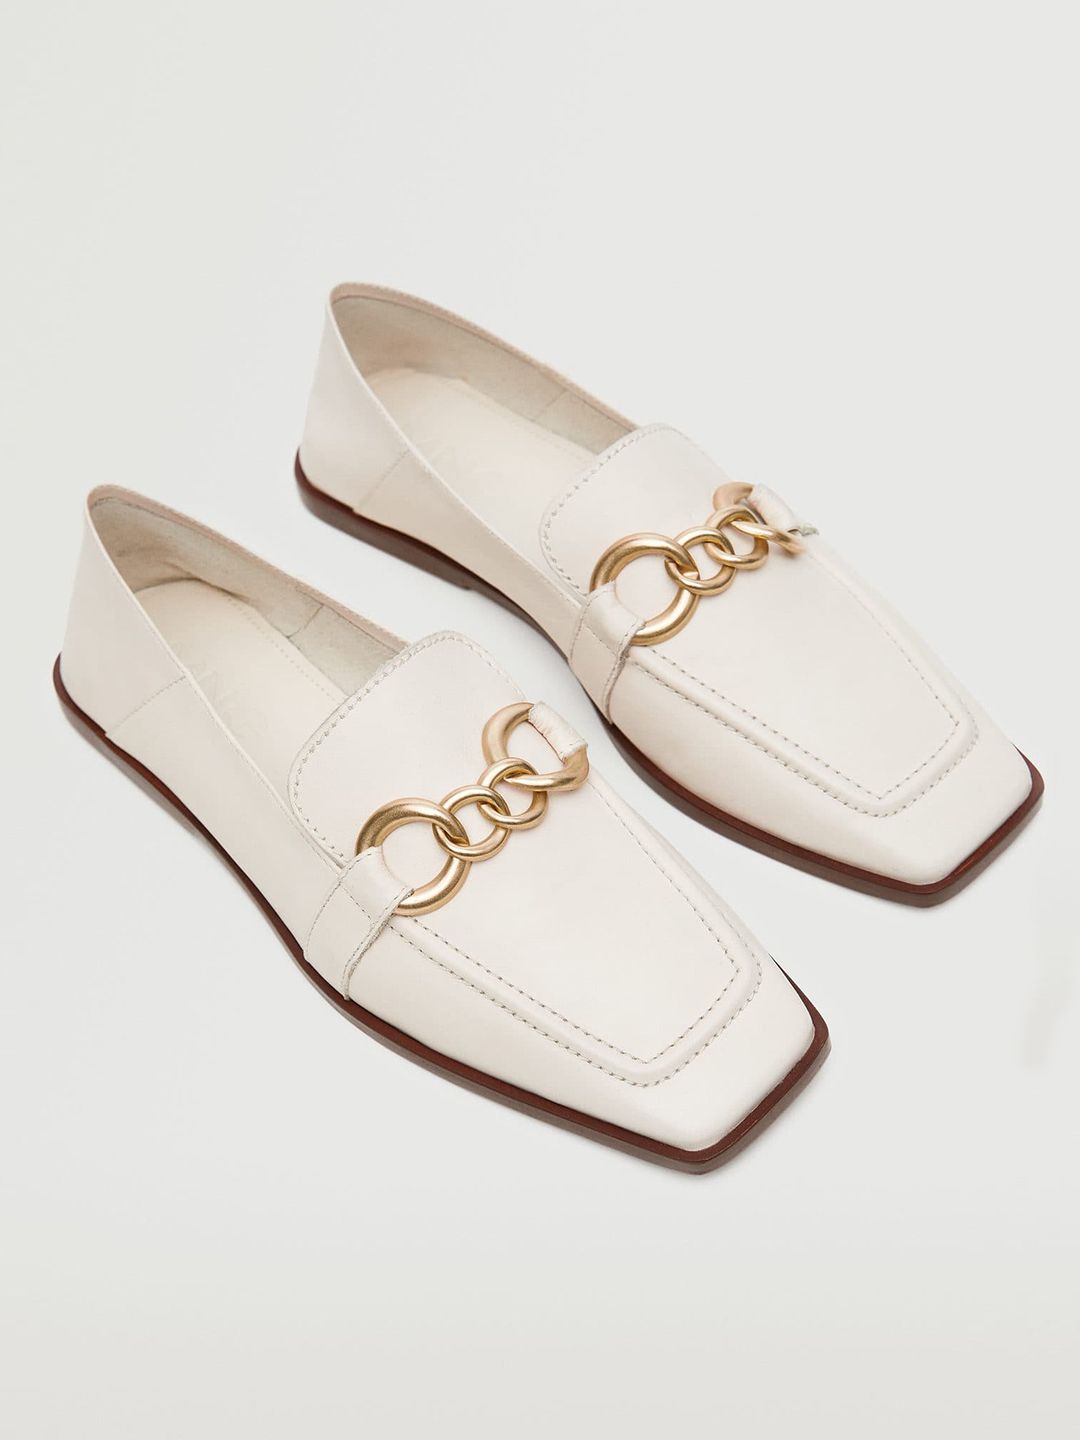 MANGO Women Off White & Gold-Toned Solid Leather Loafers Price in India